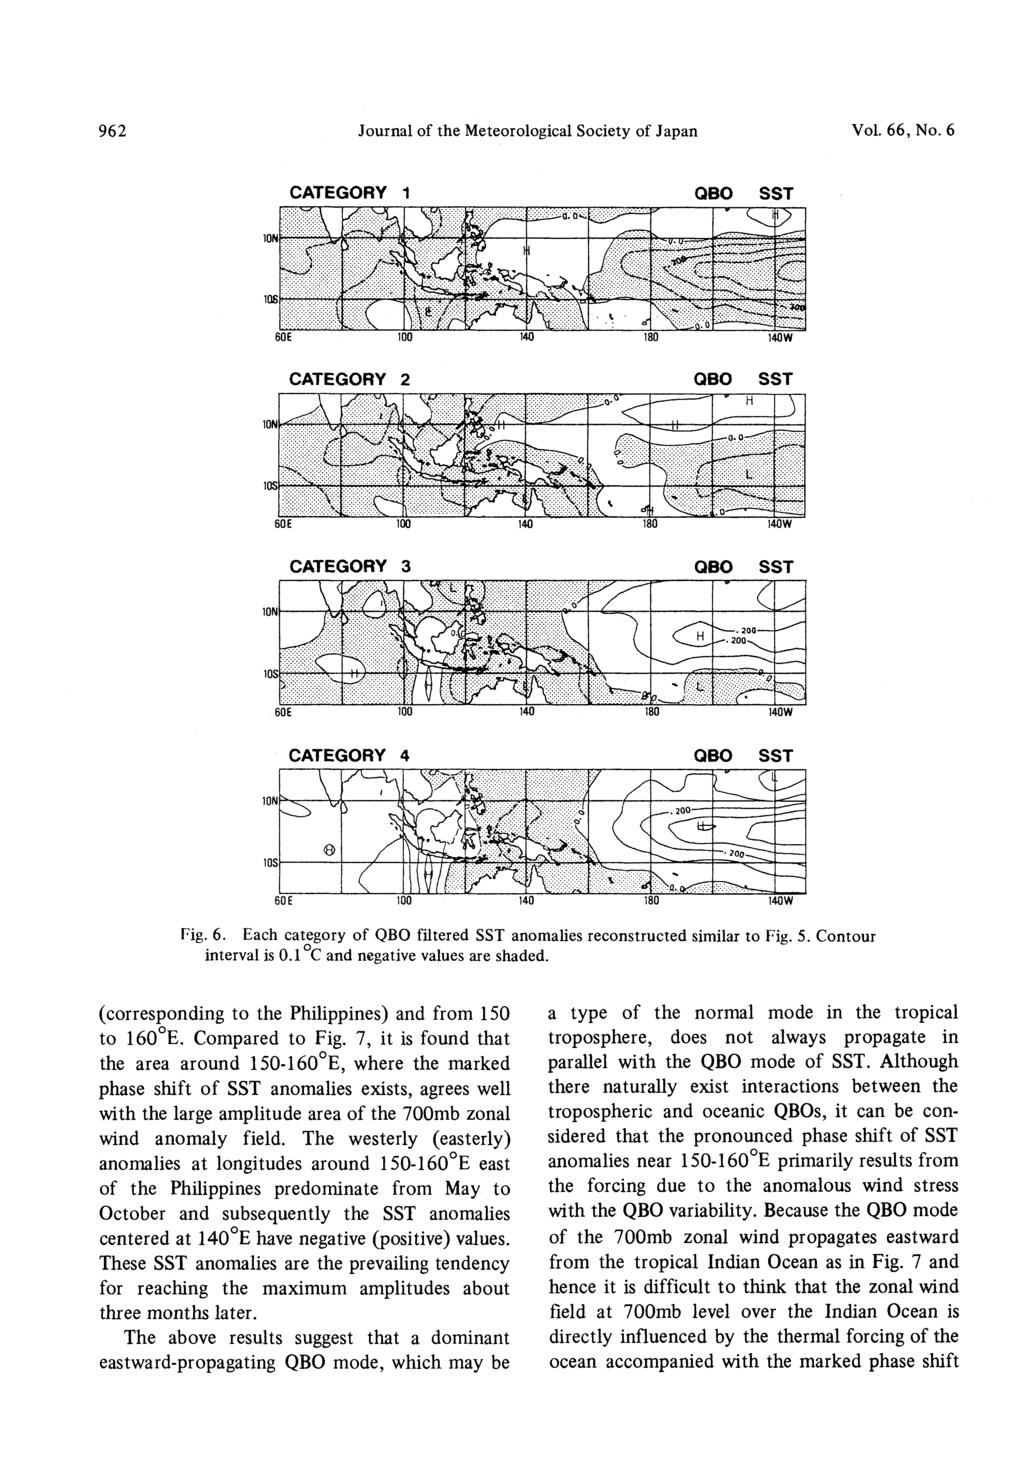 962 Journal of the Meteorological Society of Japan Vol. 66, No. 6 Fig. 6. Each category of QBO filtered SST anomalies reconstructed similar to Fig. 5. Contour interval is 0.